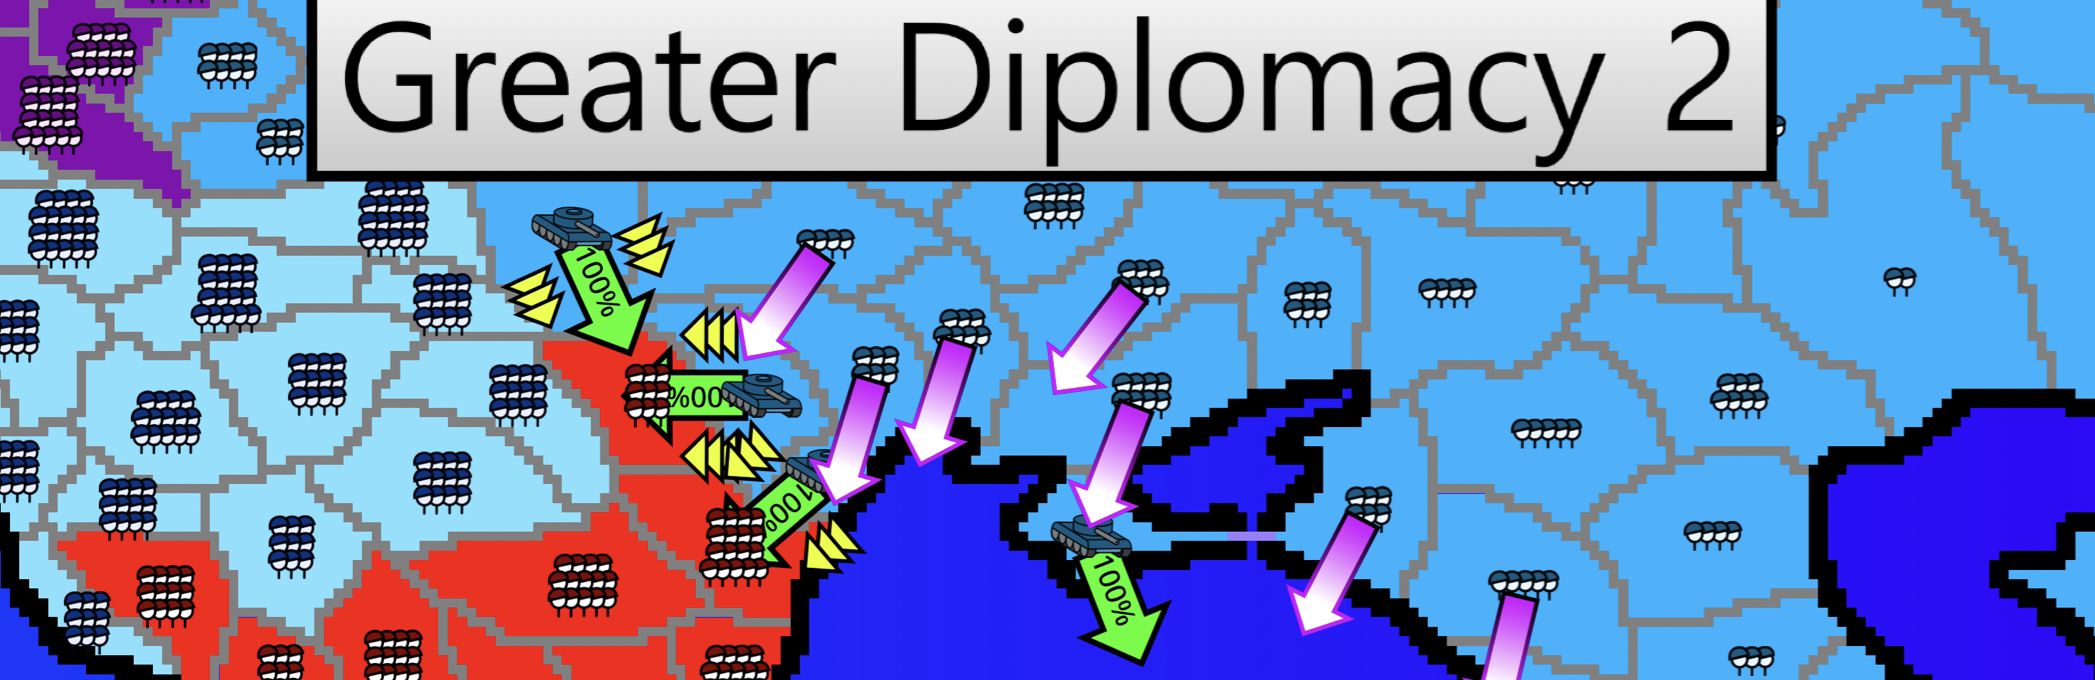 Greater Diplomacy 2